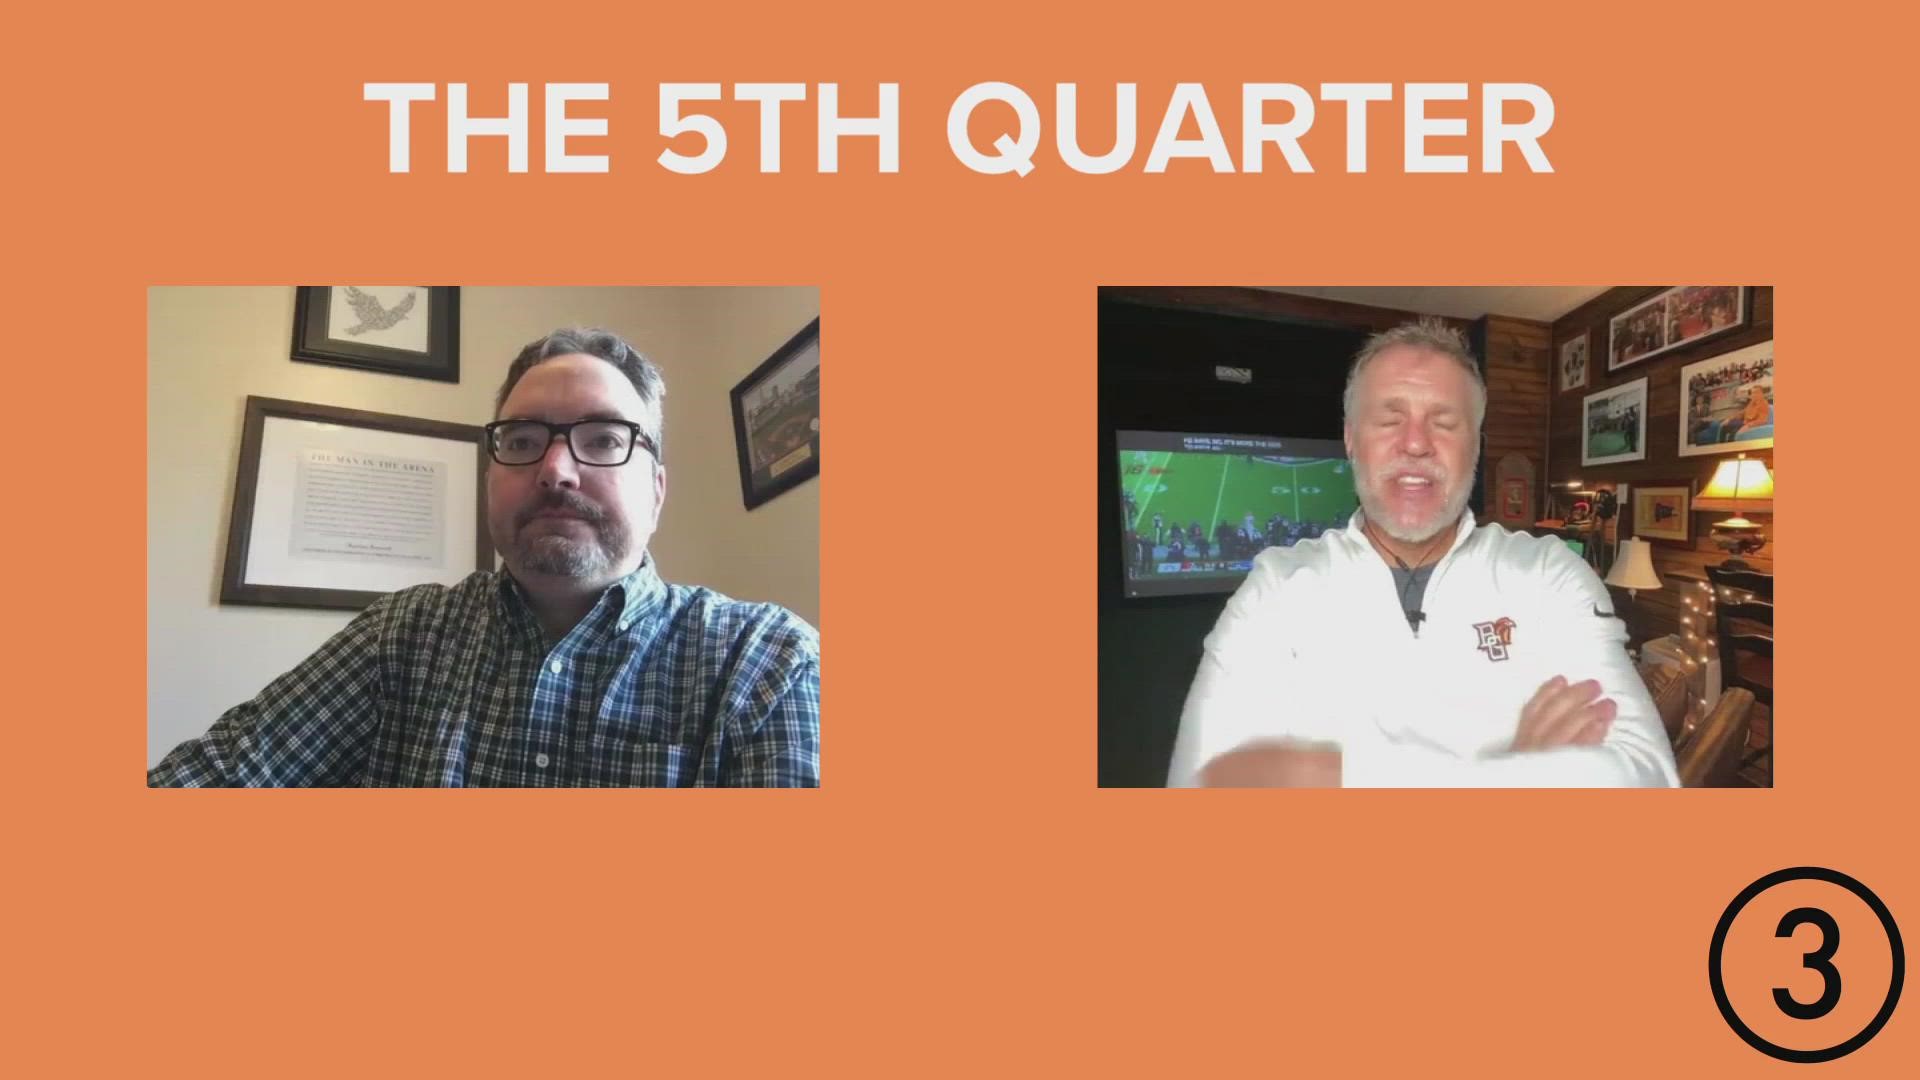 The Browns are now 6-6 after losing to the Ravens on Sunday Night Football. Jay and Dino ponder their playoff chances and what's gone wrong with the offense.